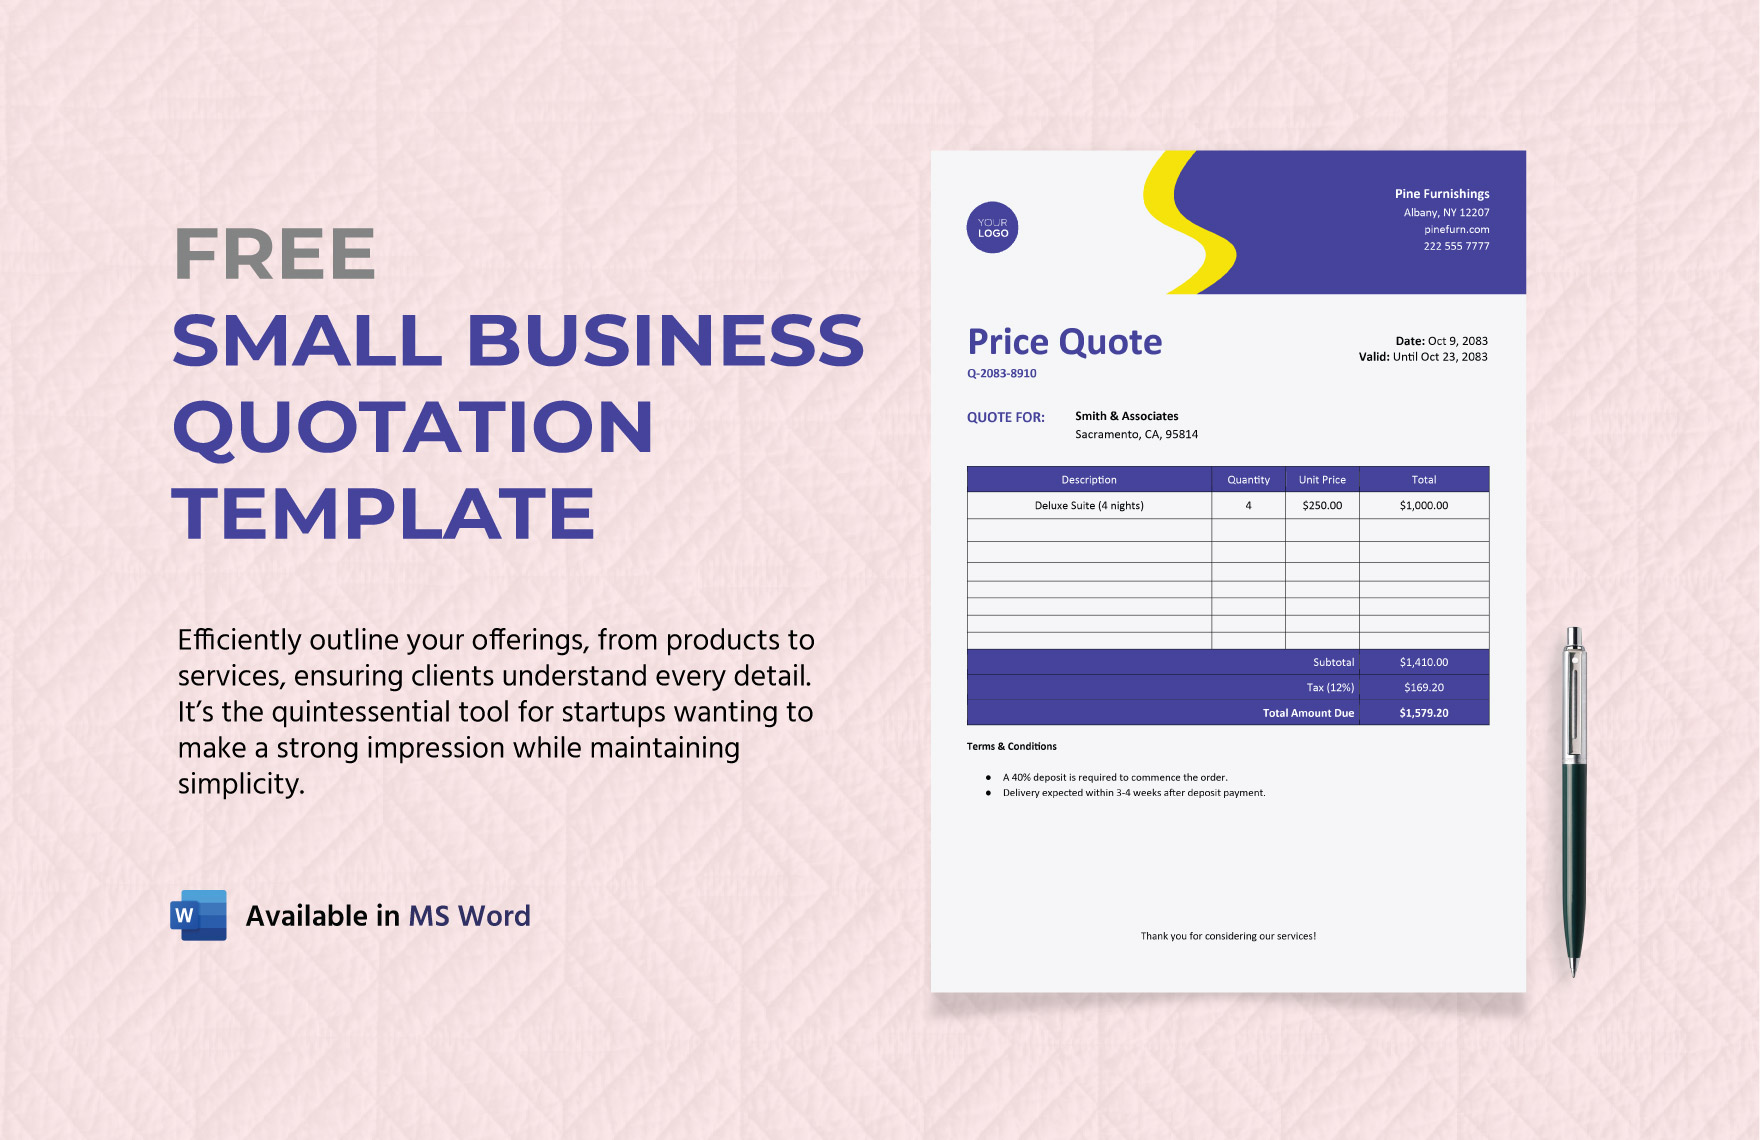 Small Business Quotation Template